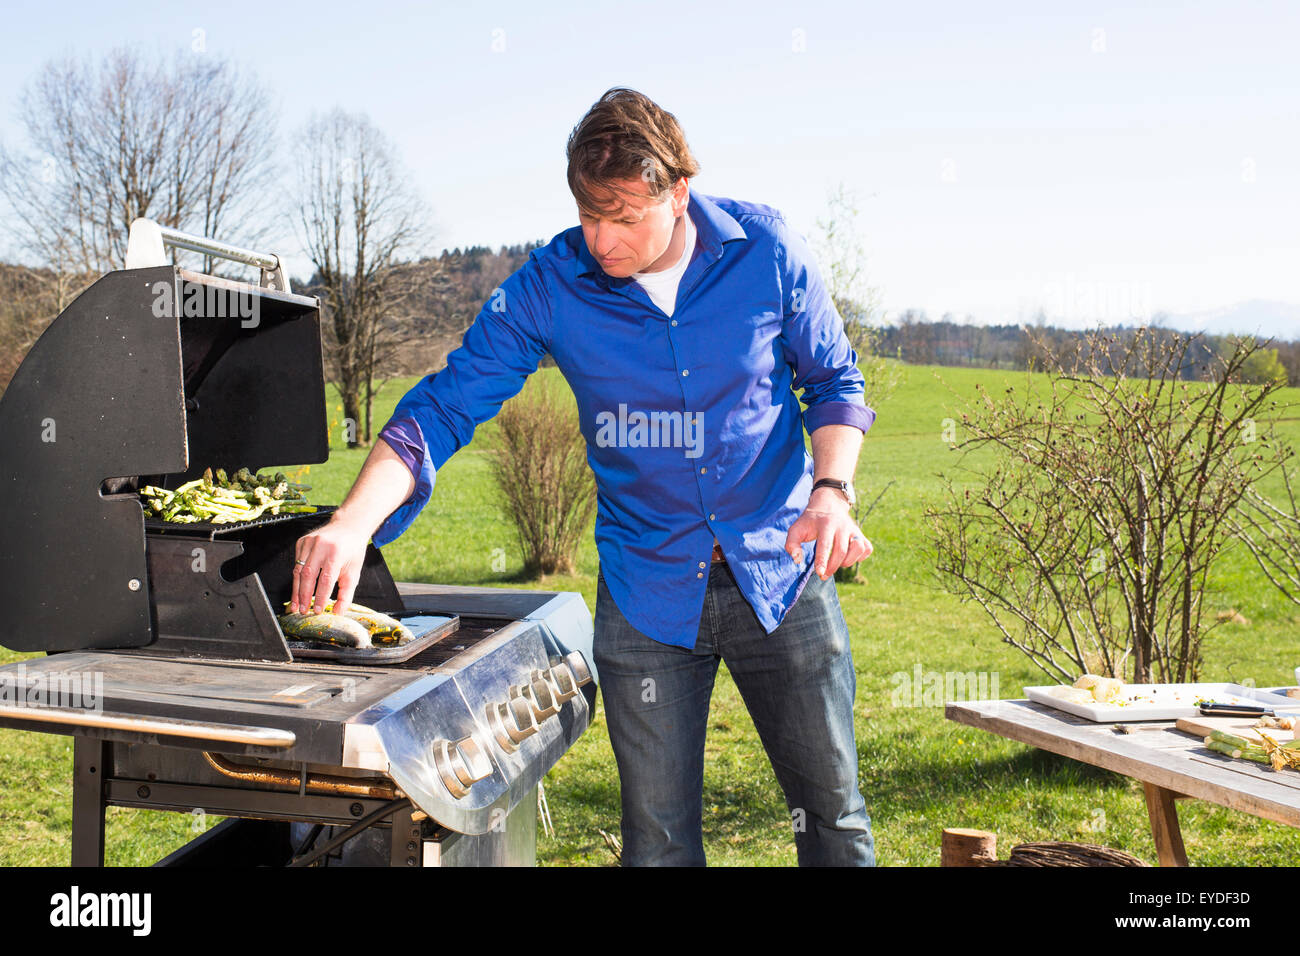 Man cooking barbecue in garden Stock Photo